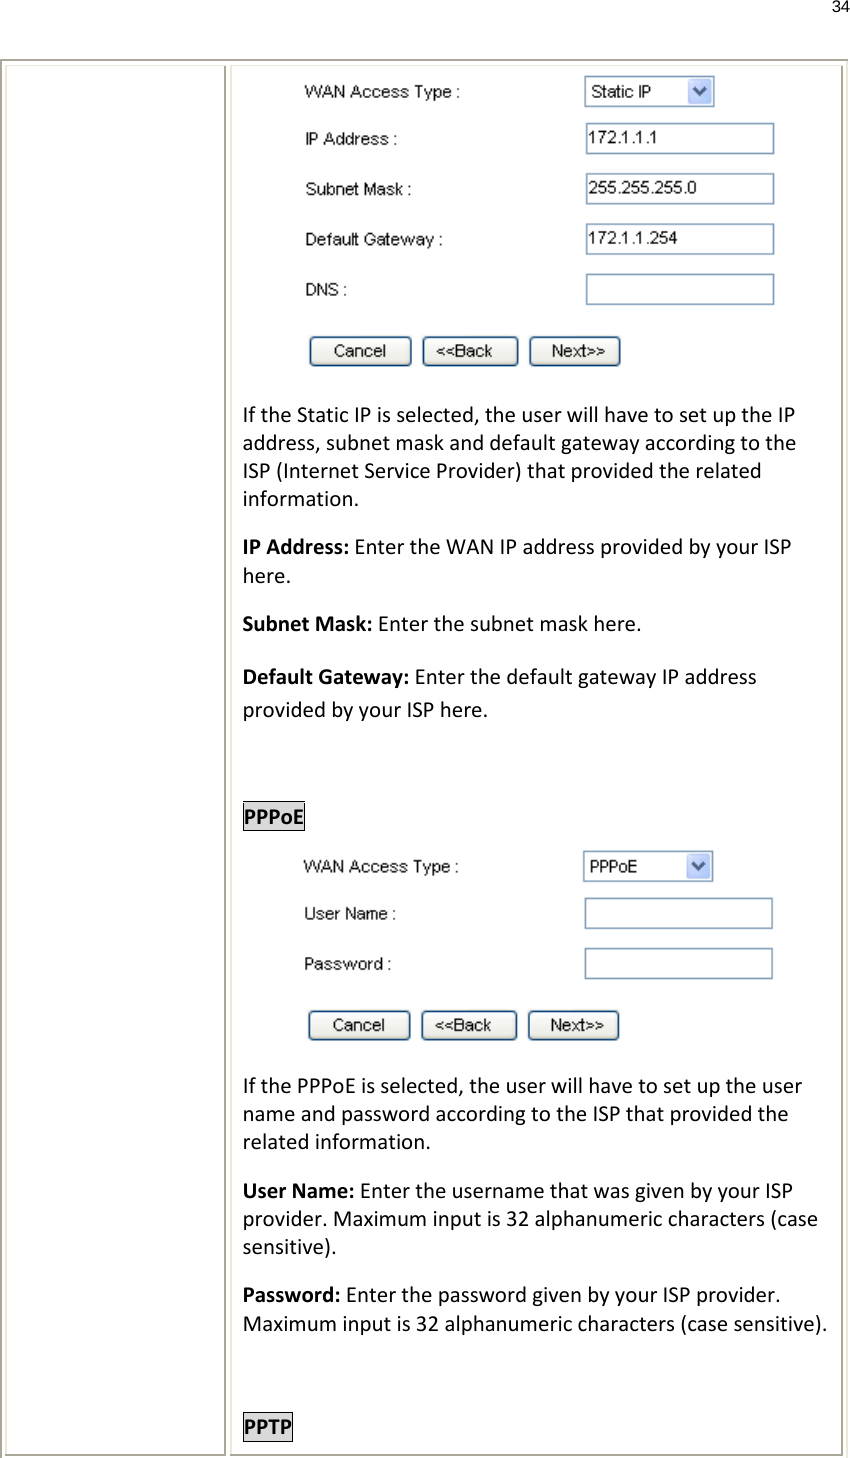 34   If the Static IP is selected, the user will have to set up the IP address, subnet mask and default gateway according to the ISP (Internet Service Provider) that provided the related information. IP Address: Enter the WAN IP address provided by your ISP here. Subnet Mask: Enter the subnet mask here. Default Gateway: Enter the default gateway IP address provided by your ISP here.  PPPoE  If the PPPoE is selected, the user will have to set up the user name and password according to the ISP that provided the related information. User Name: Enter the username that was given by your ISP provider. Maximum input is 32 alphanumeric characters (case sensitive). Password: Enter the password given by your ISP provider. Maximum input is 32 alphanumeric characters (case sensitive).  PPTP 